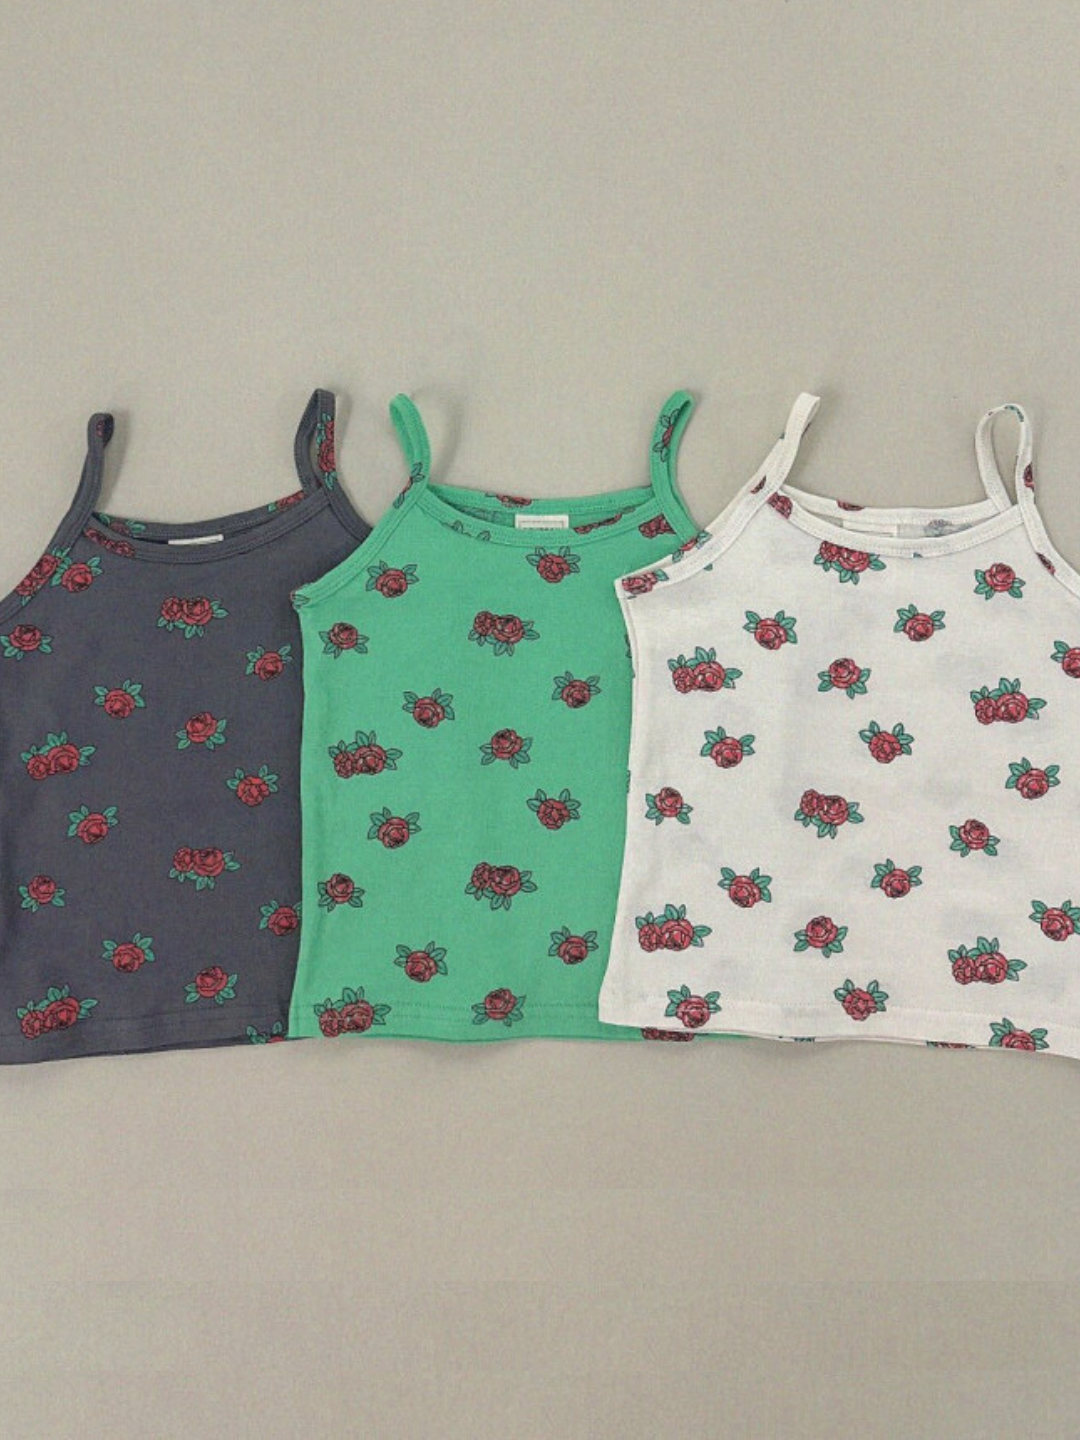 Three color ward of the kids' roses tank tops are laid flat